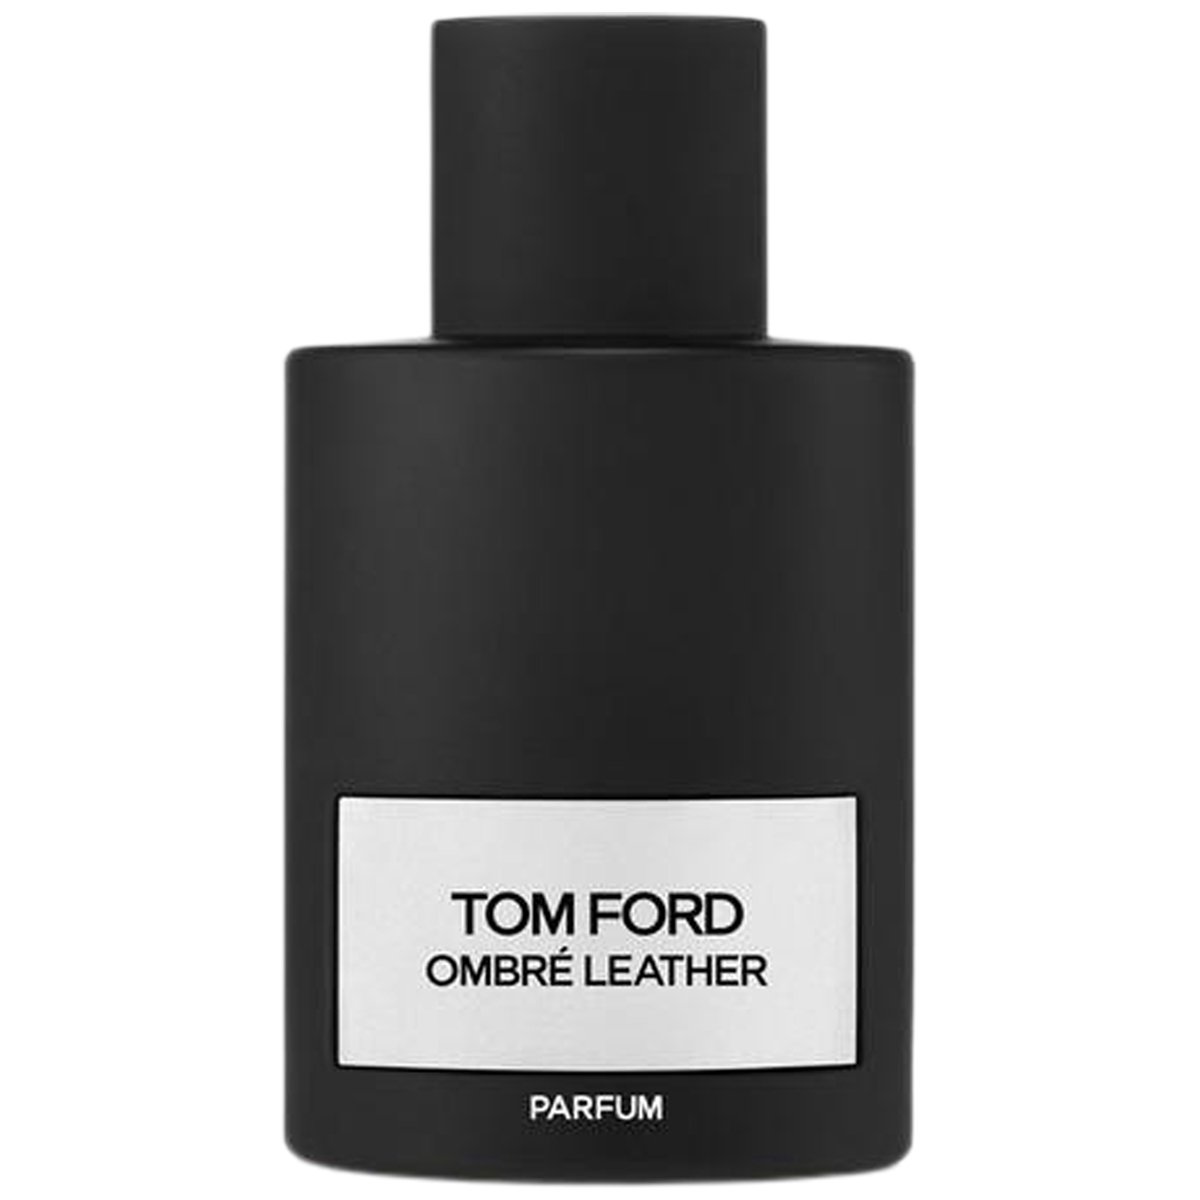 Top 46+ imagen tom ford ombre leather parfum